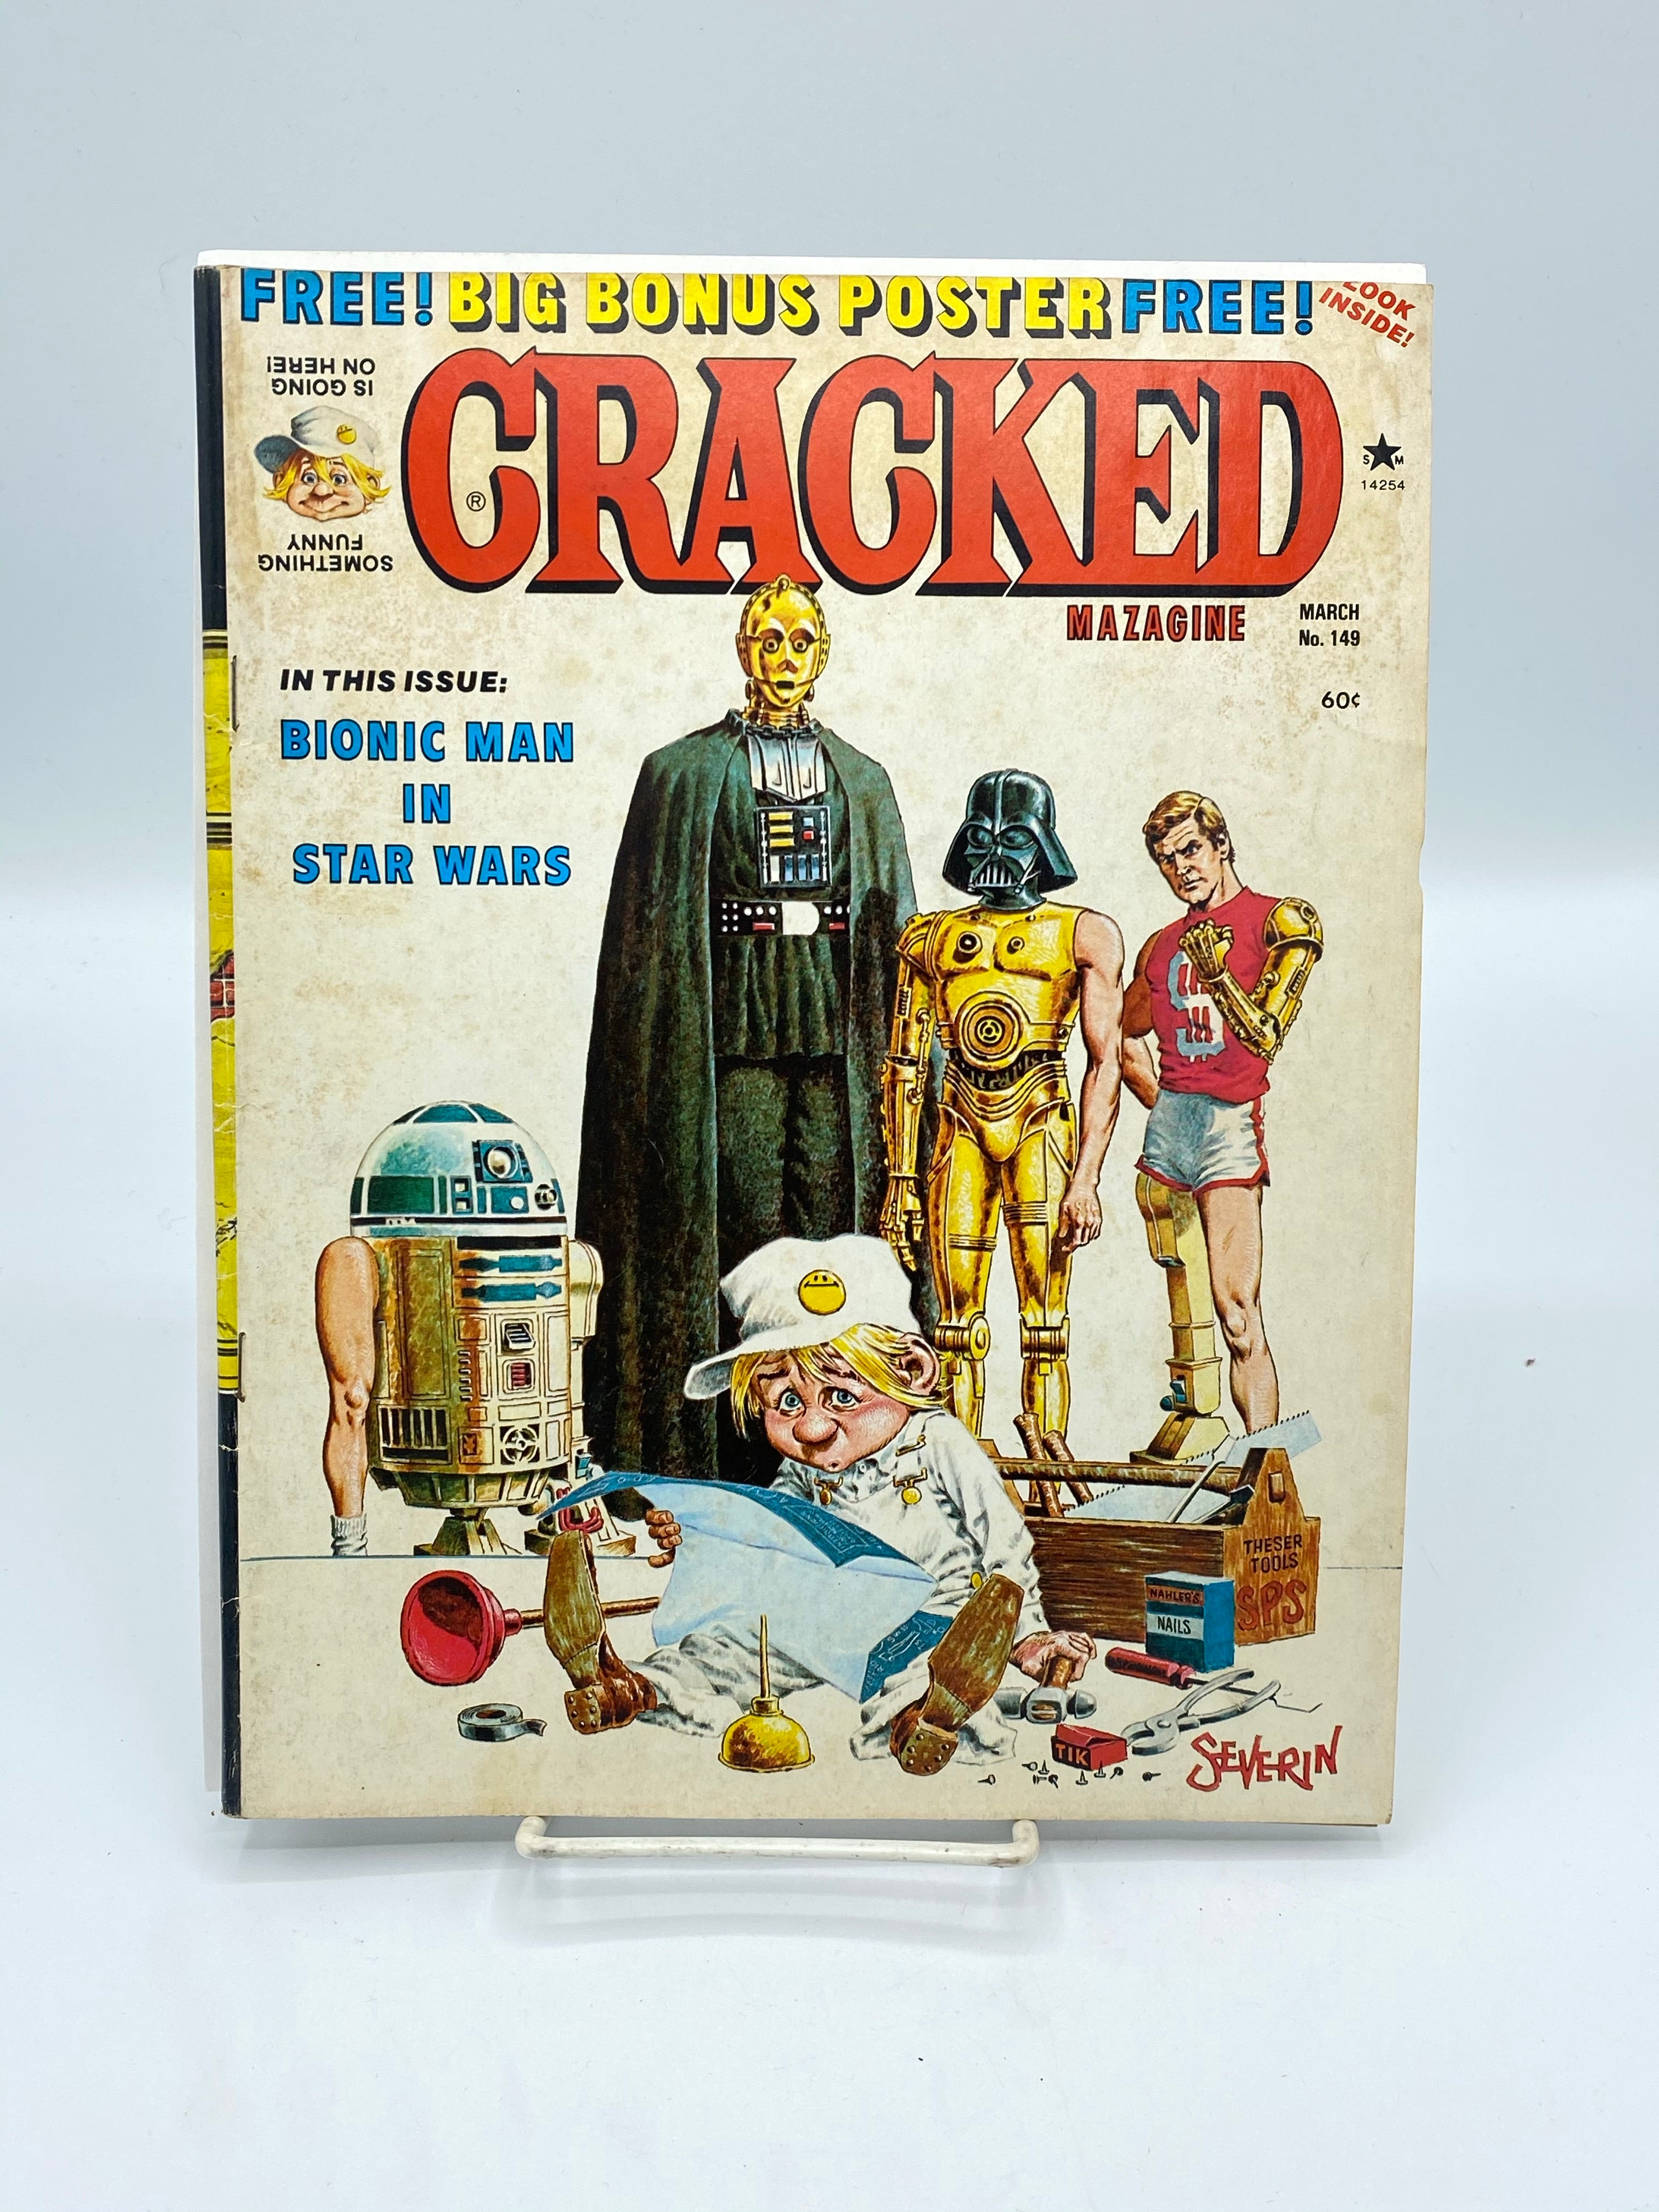 Cracked Magazine Issue No. 149 March